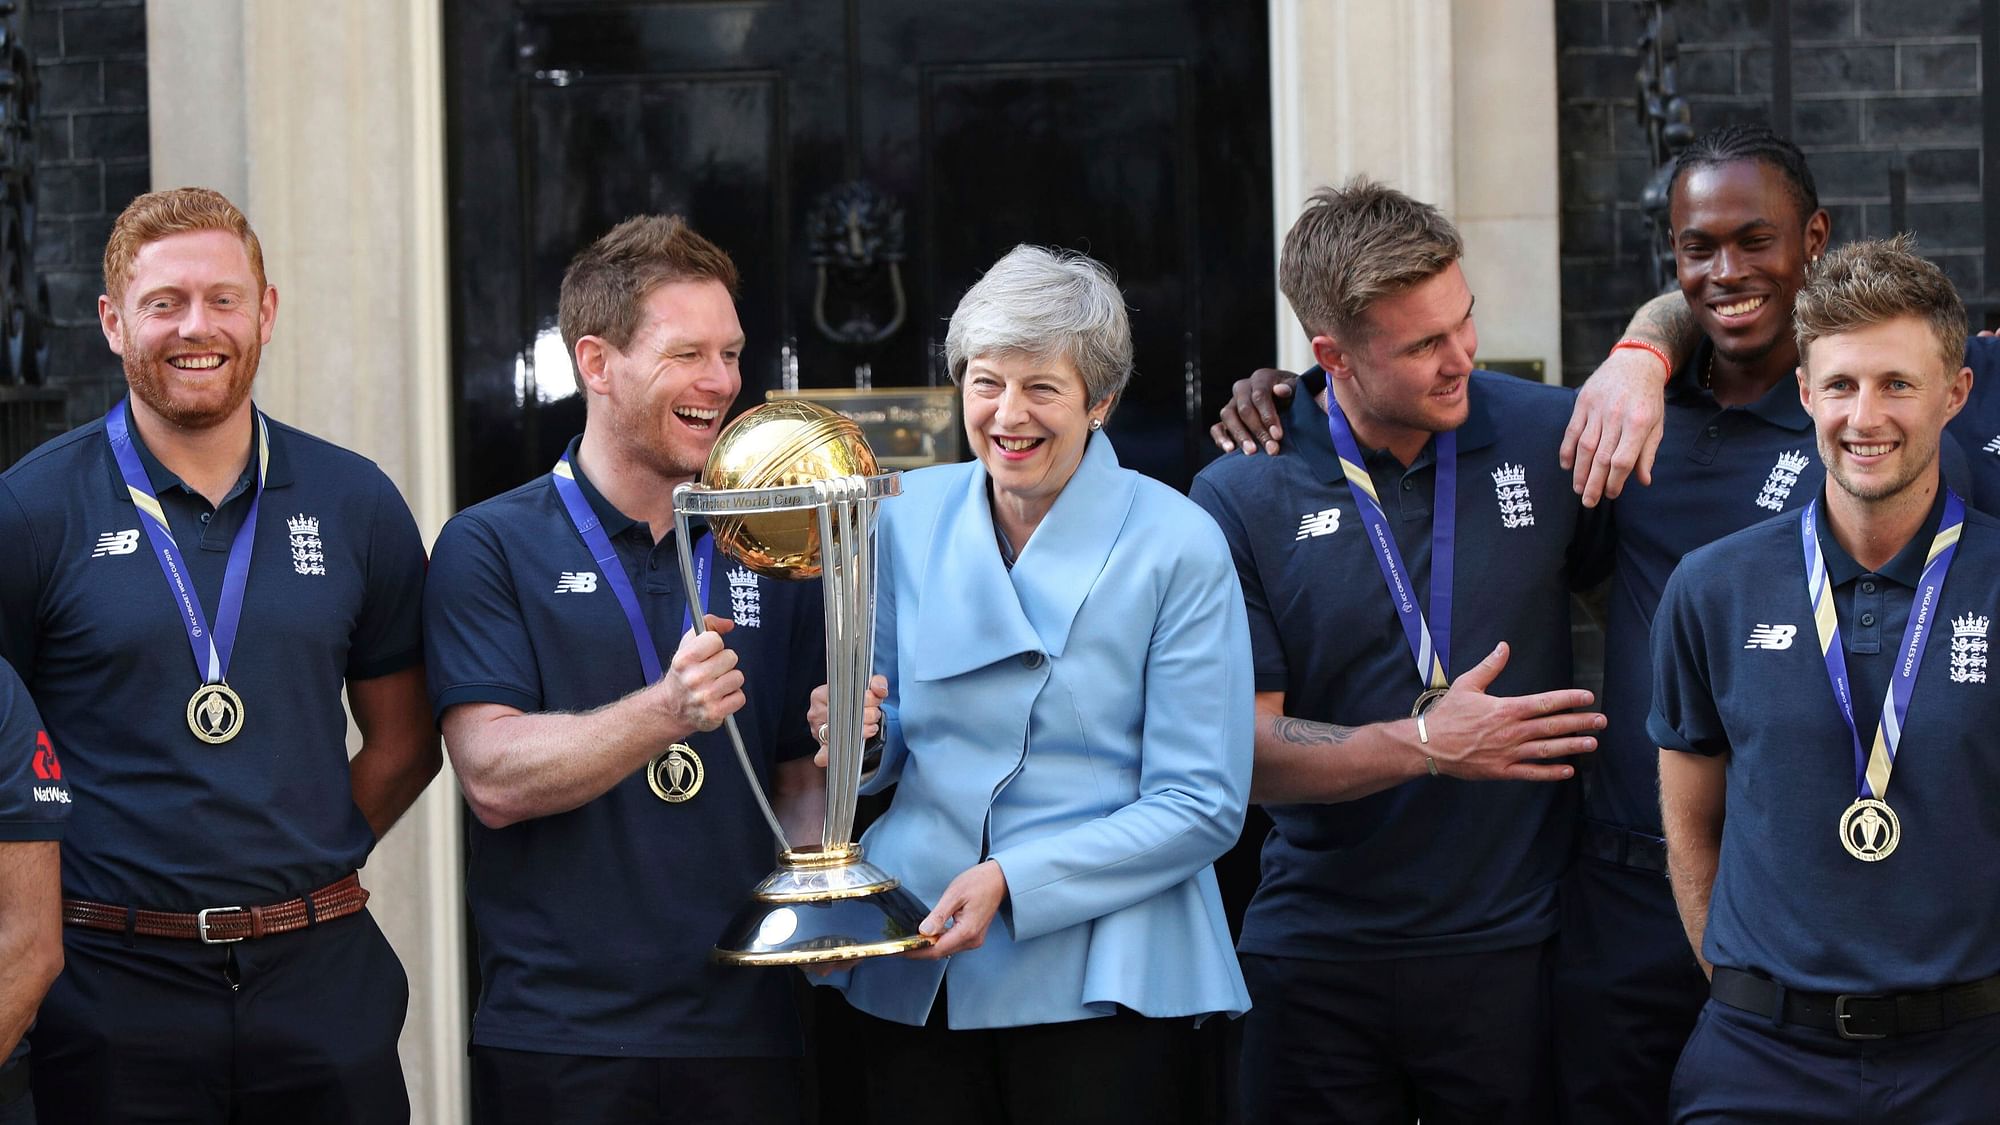 The England and Wales Cricket Board (ECB) has announced a 61 million pound package to help the sport “withstand” the financial impact of the COVID-19.